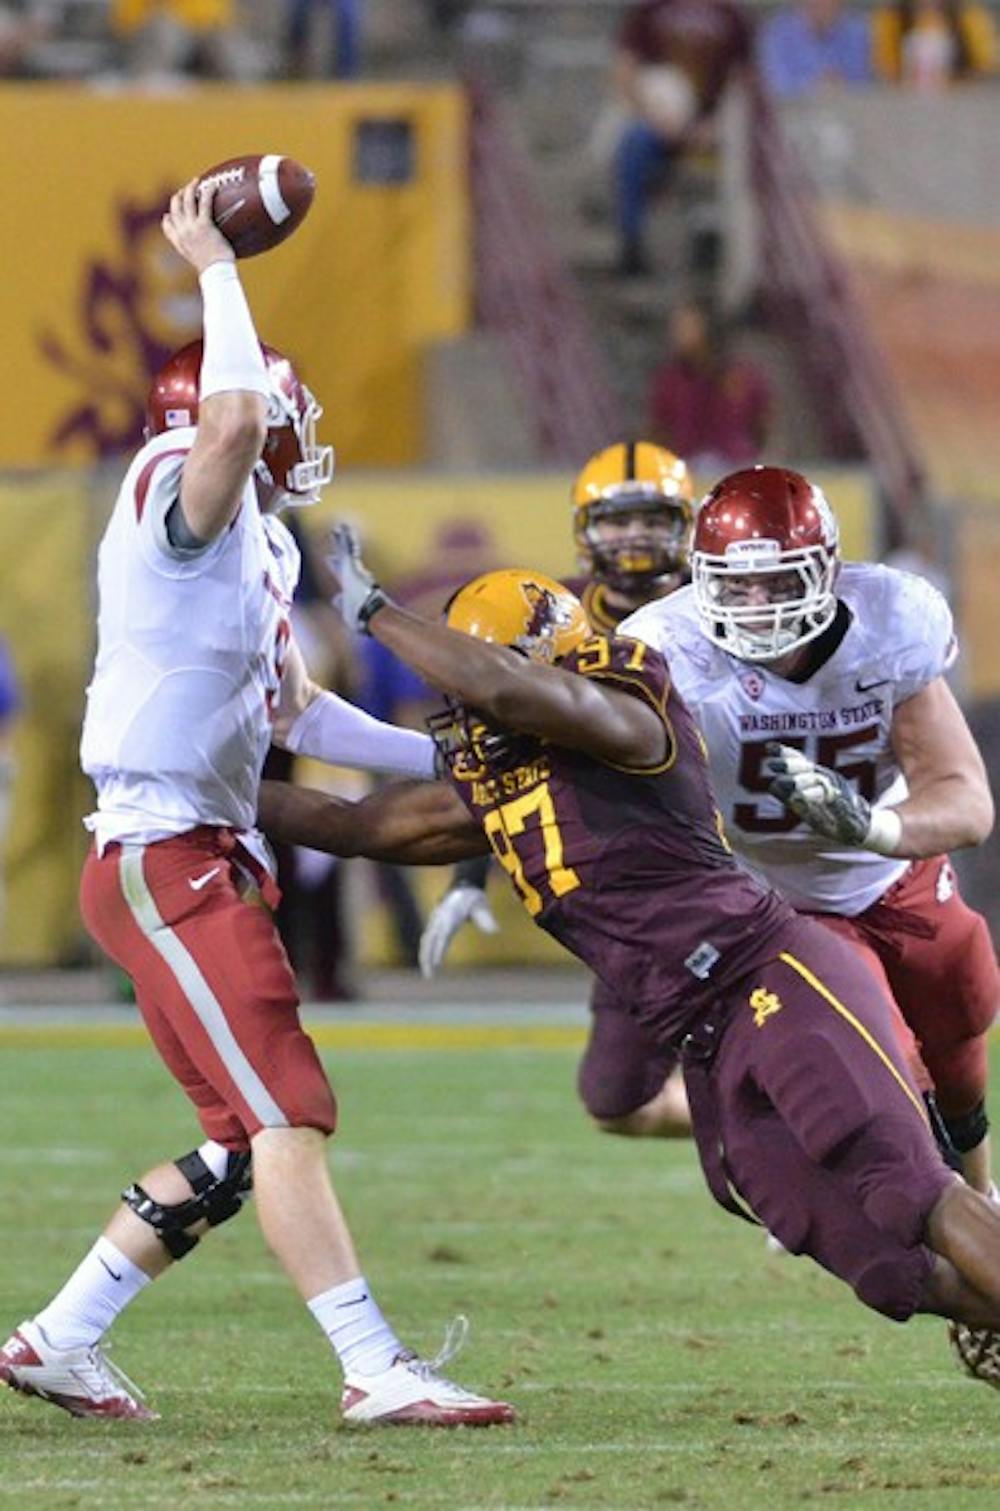 STRUGGLE FOR CONTROL: ASU sophomore Junior Onyeali (center) dives for a sack at Washington State redshirt senior Marshall Lobbestael during the Sun Devils’ home meeting against the Cougars. WSU is relying on its passing game against ASU to snap its five-game losing streak. (Photo by Aaron Lavinsky)